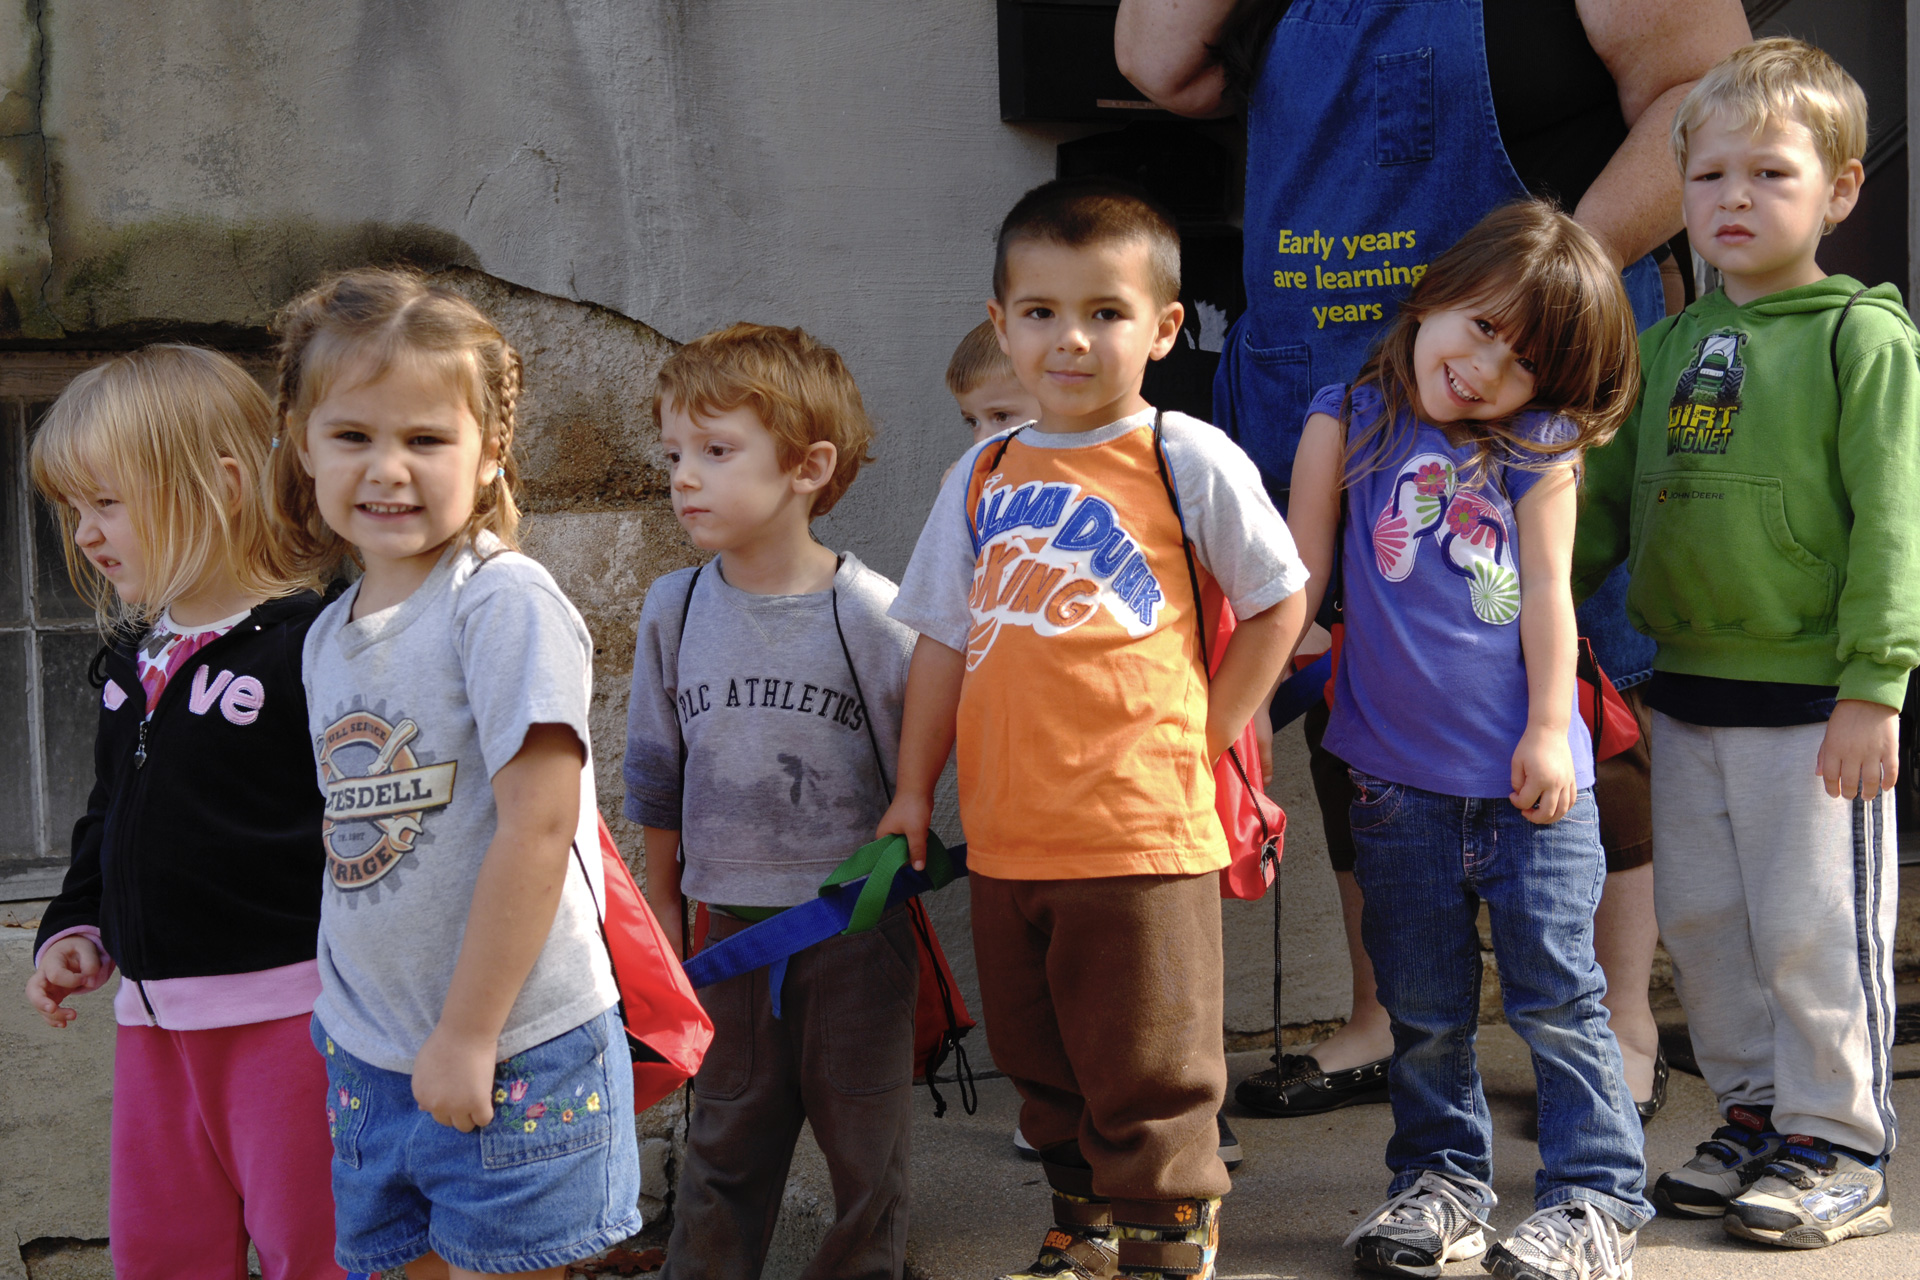 A group of toddlers waits in line